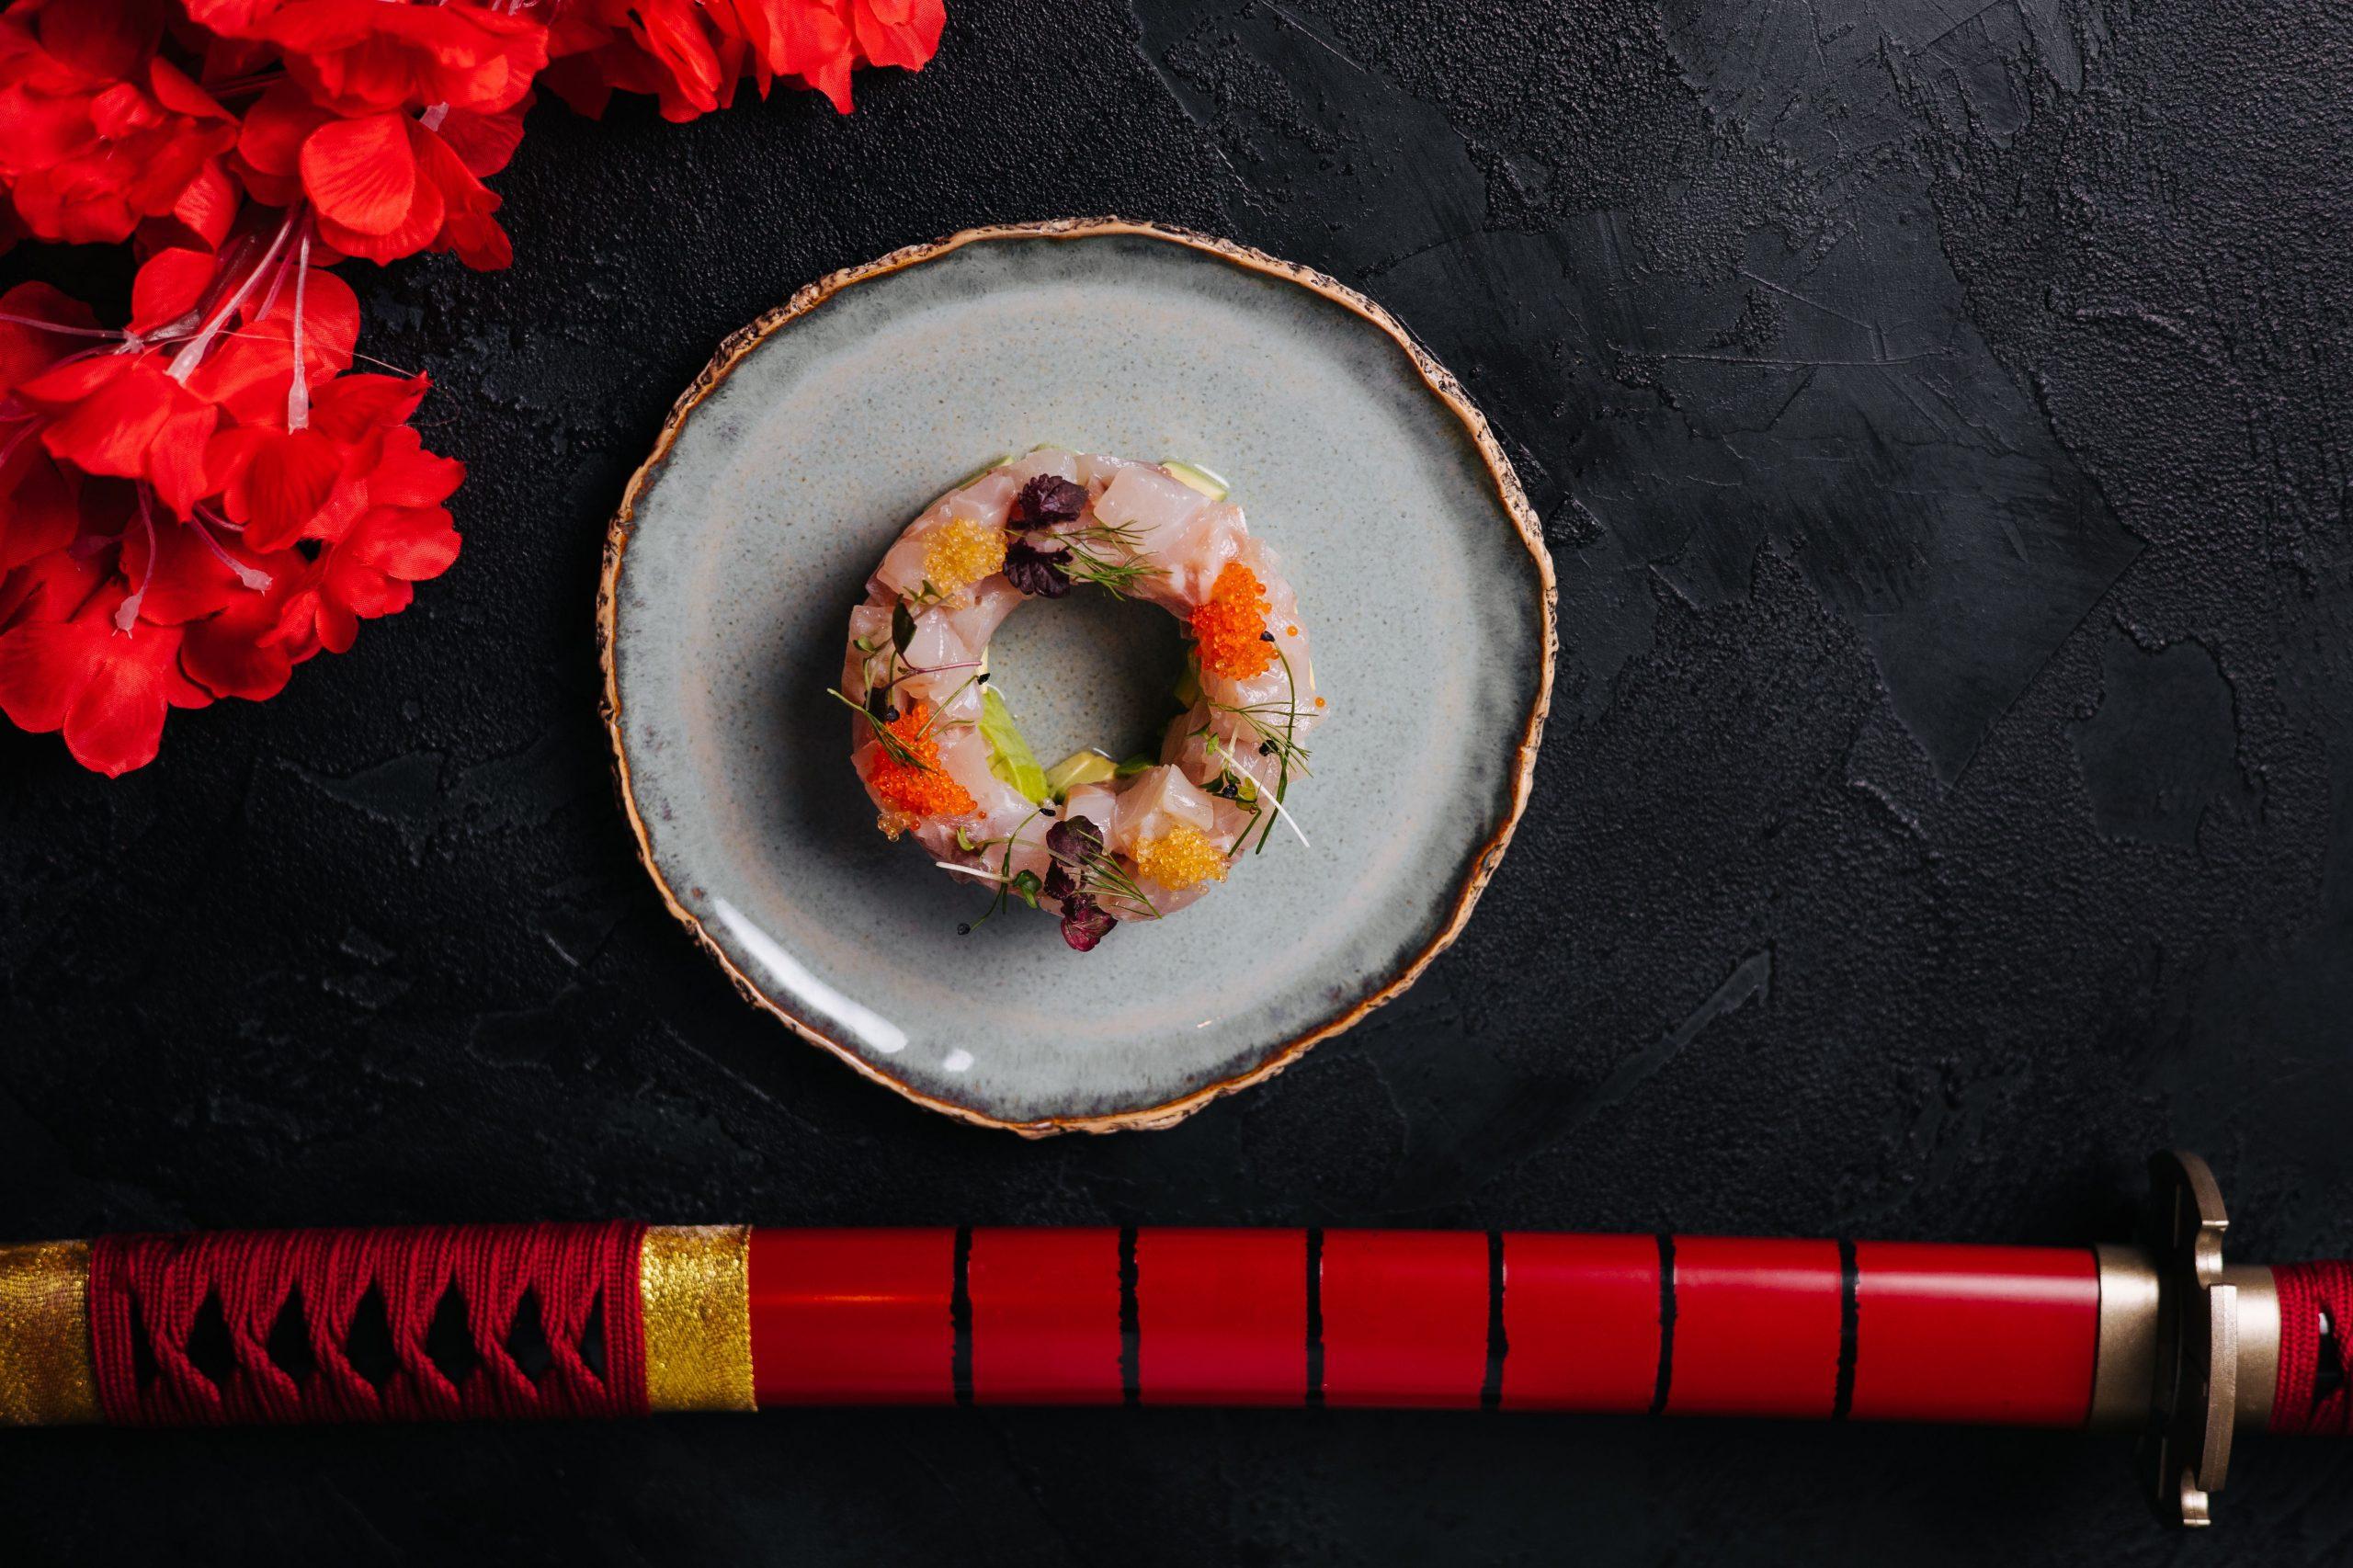 An immersive Japanese lounge and show is opening at The Pointe